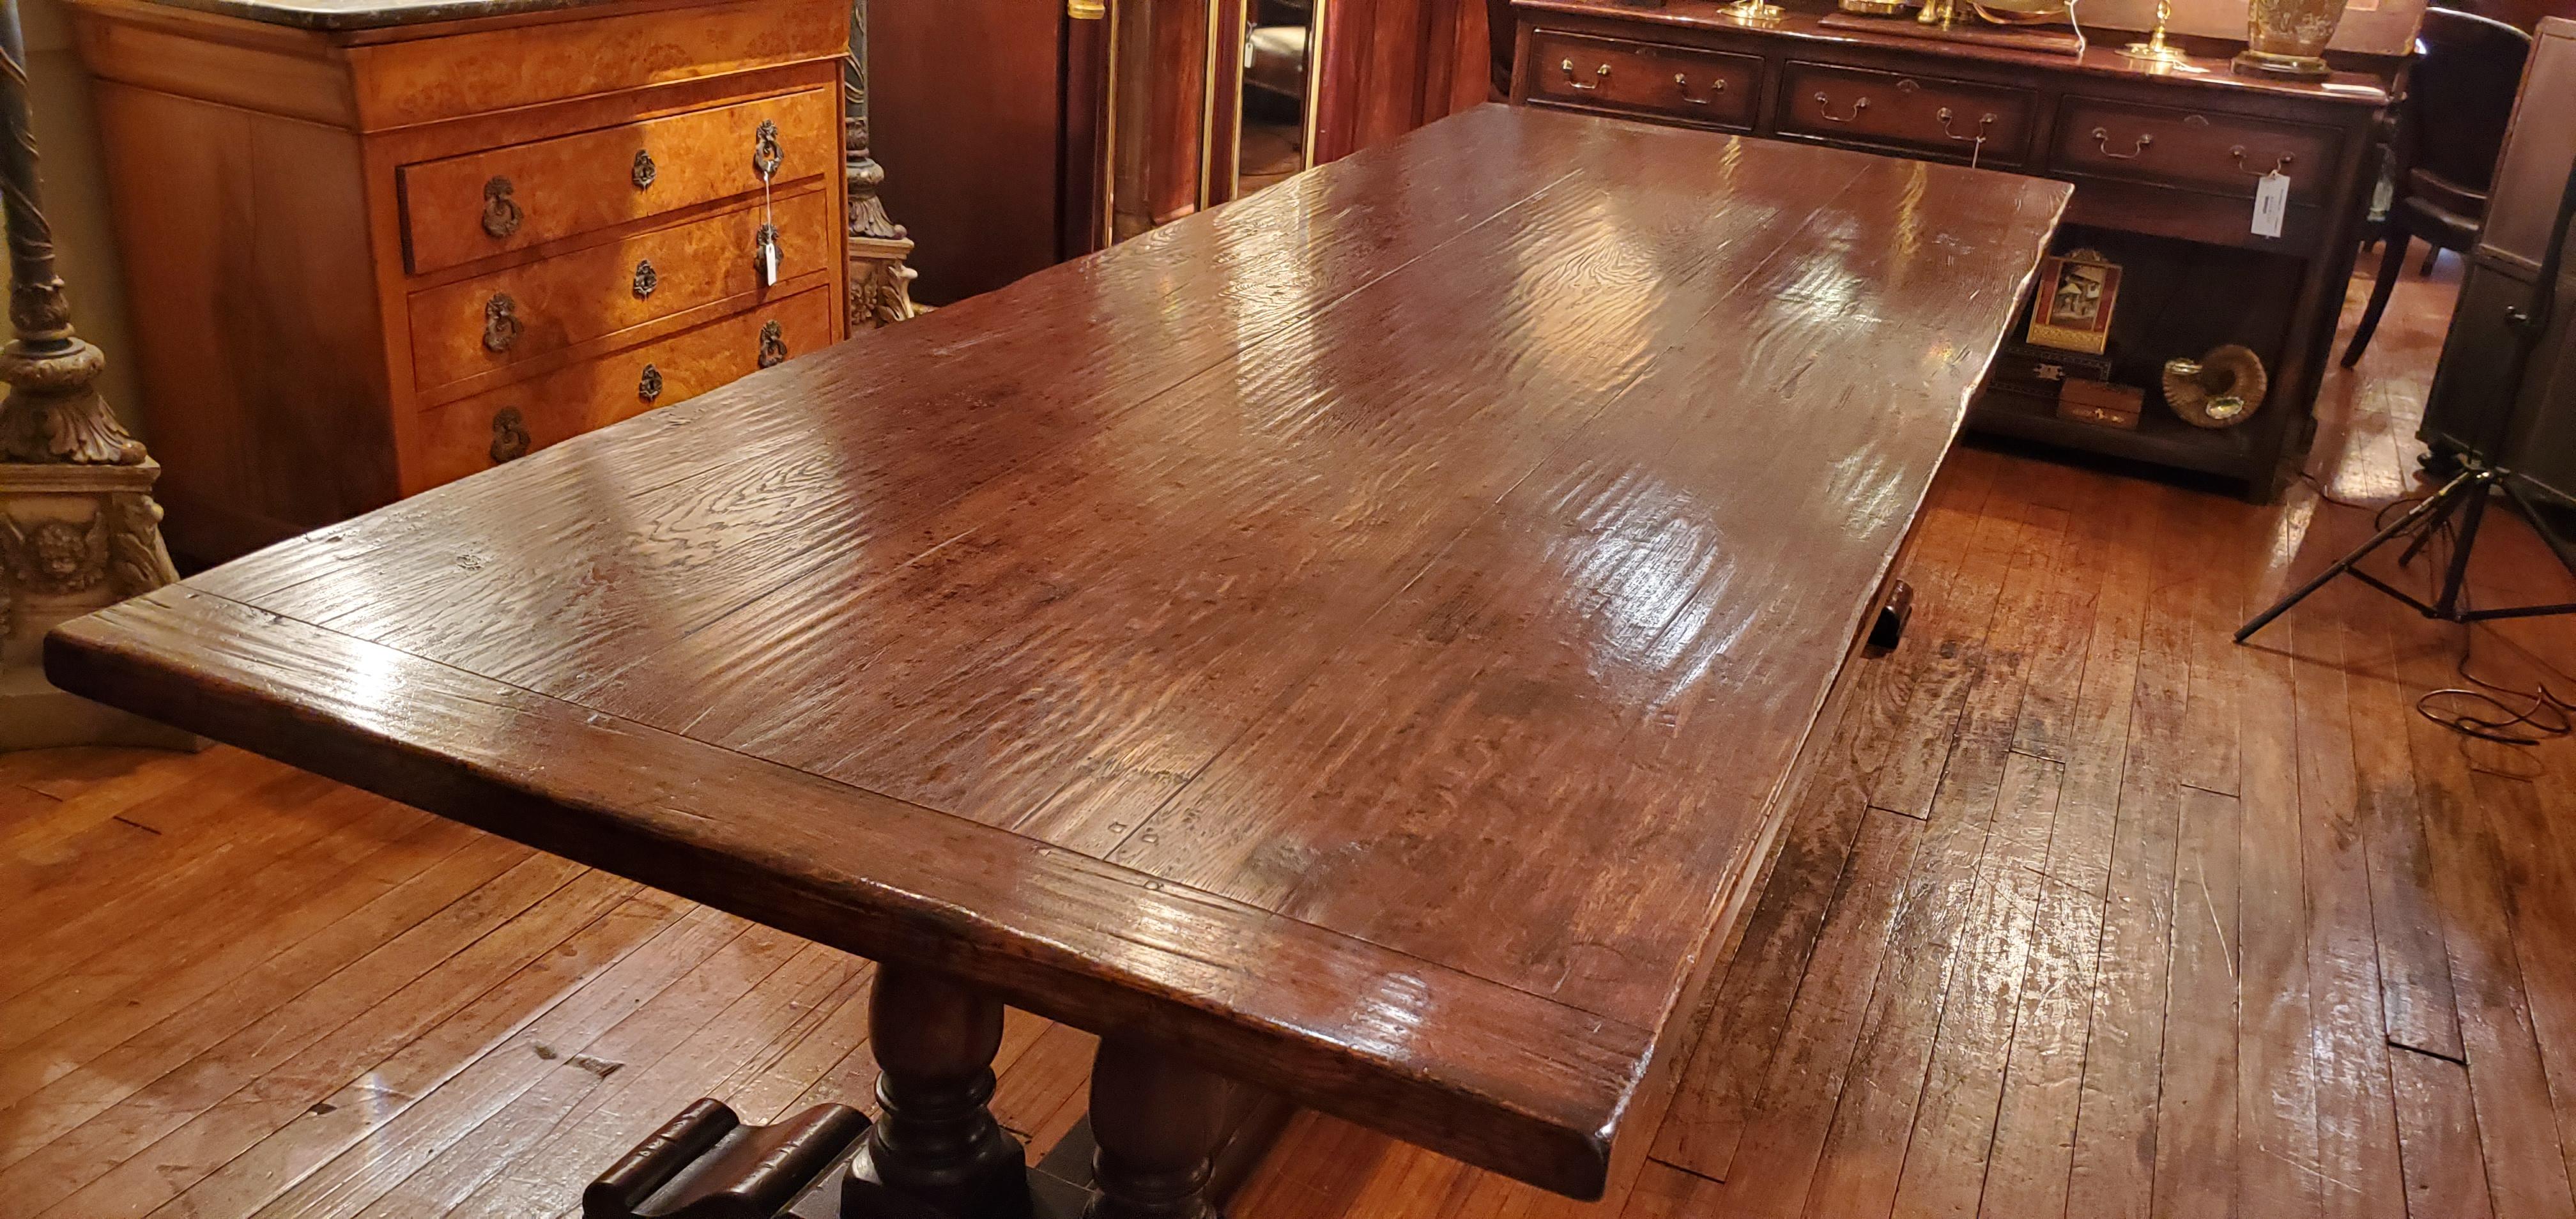 Handmade English Oak trestle dining table. Made from old oak to give it a vintage, antique appearance.